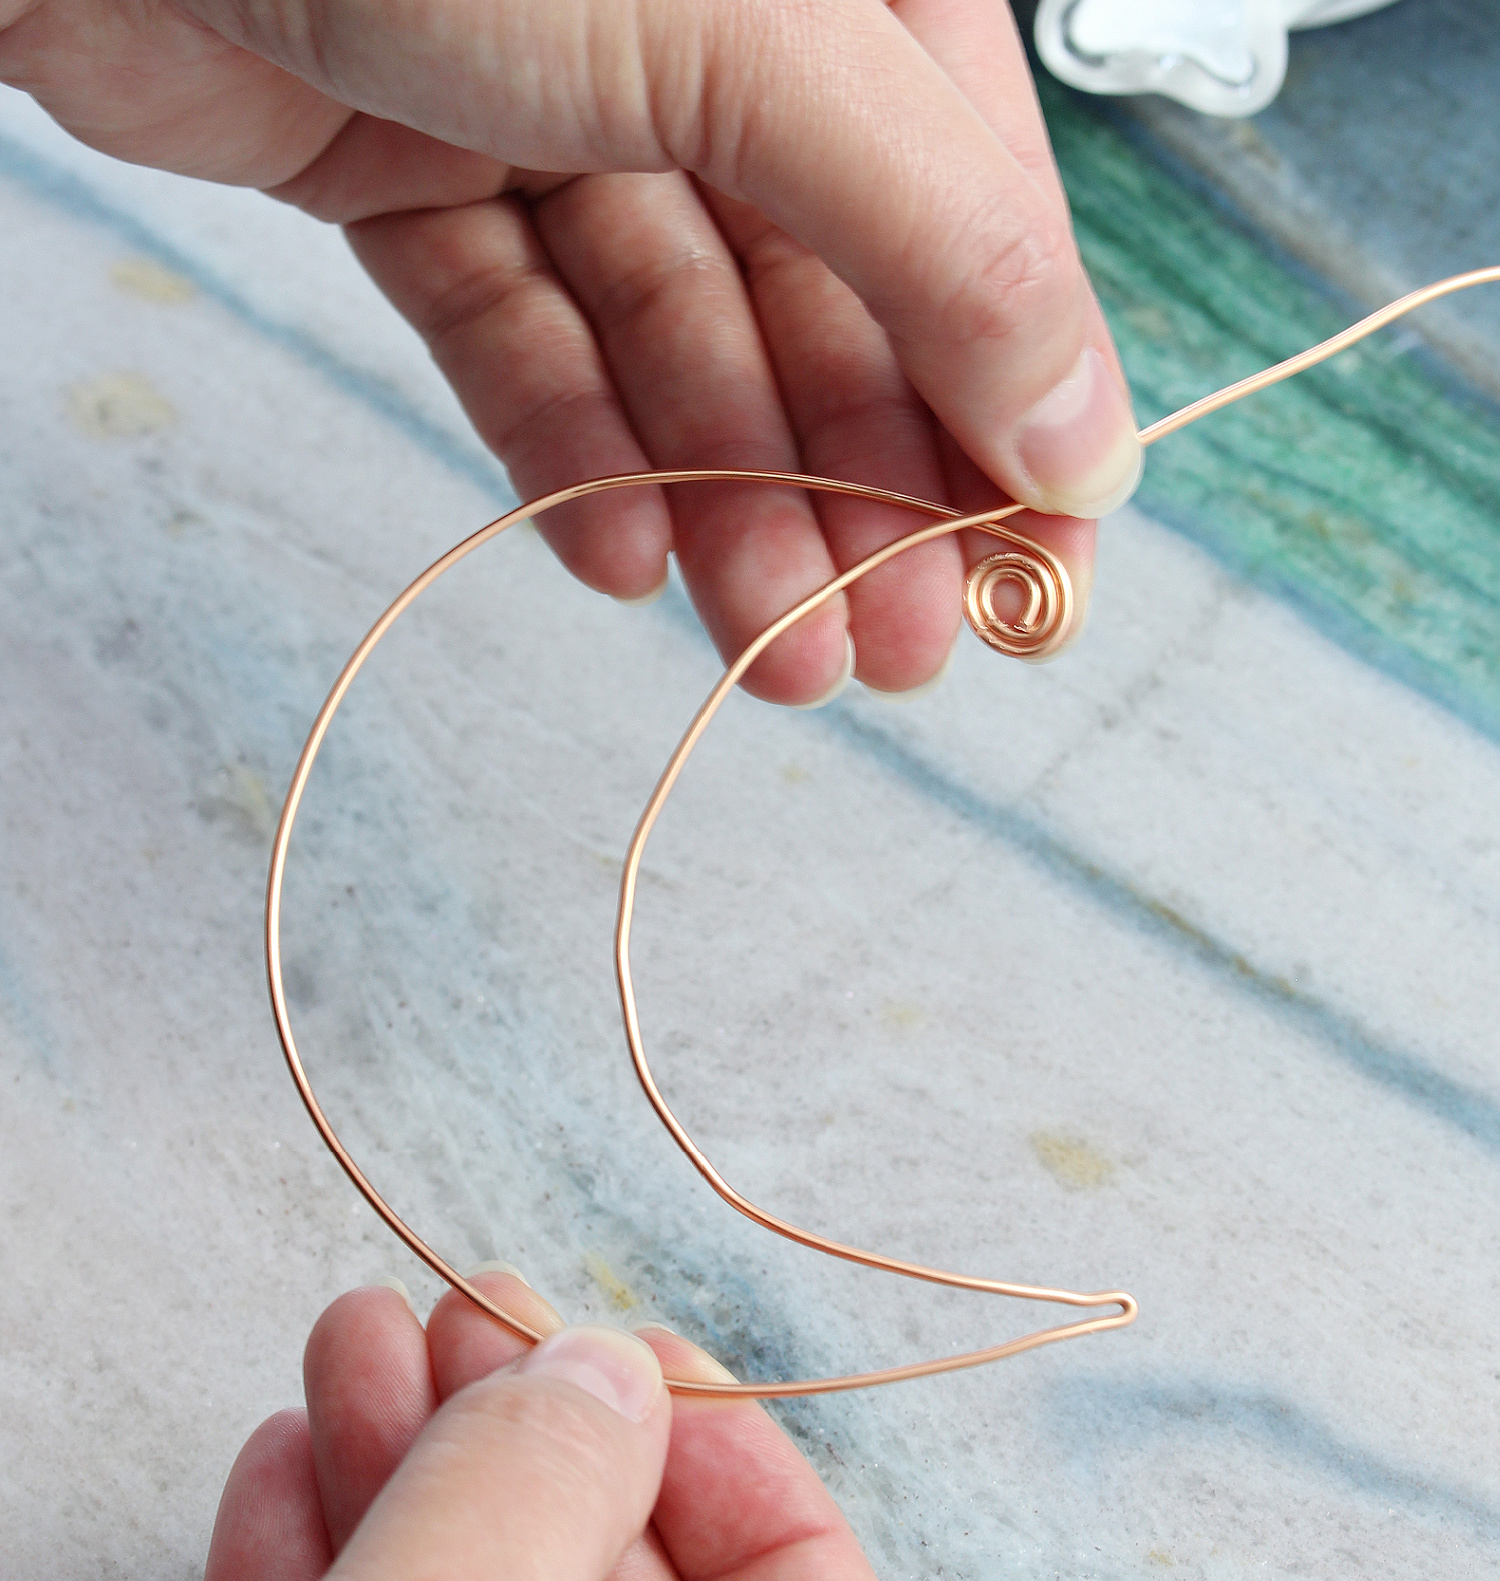 How to Make a Wire Moon Shape